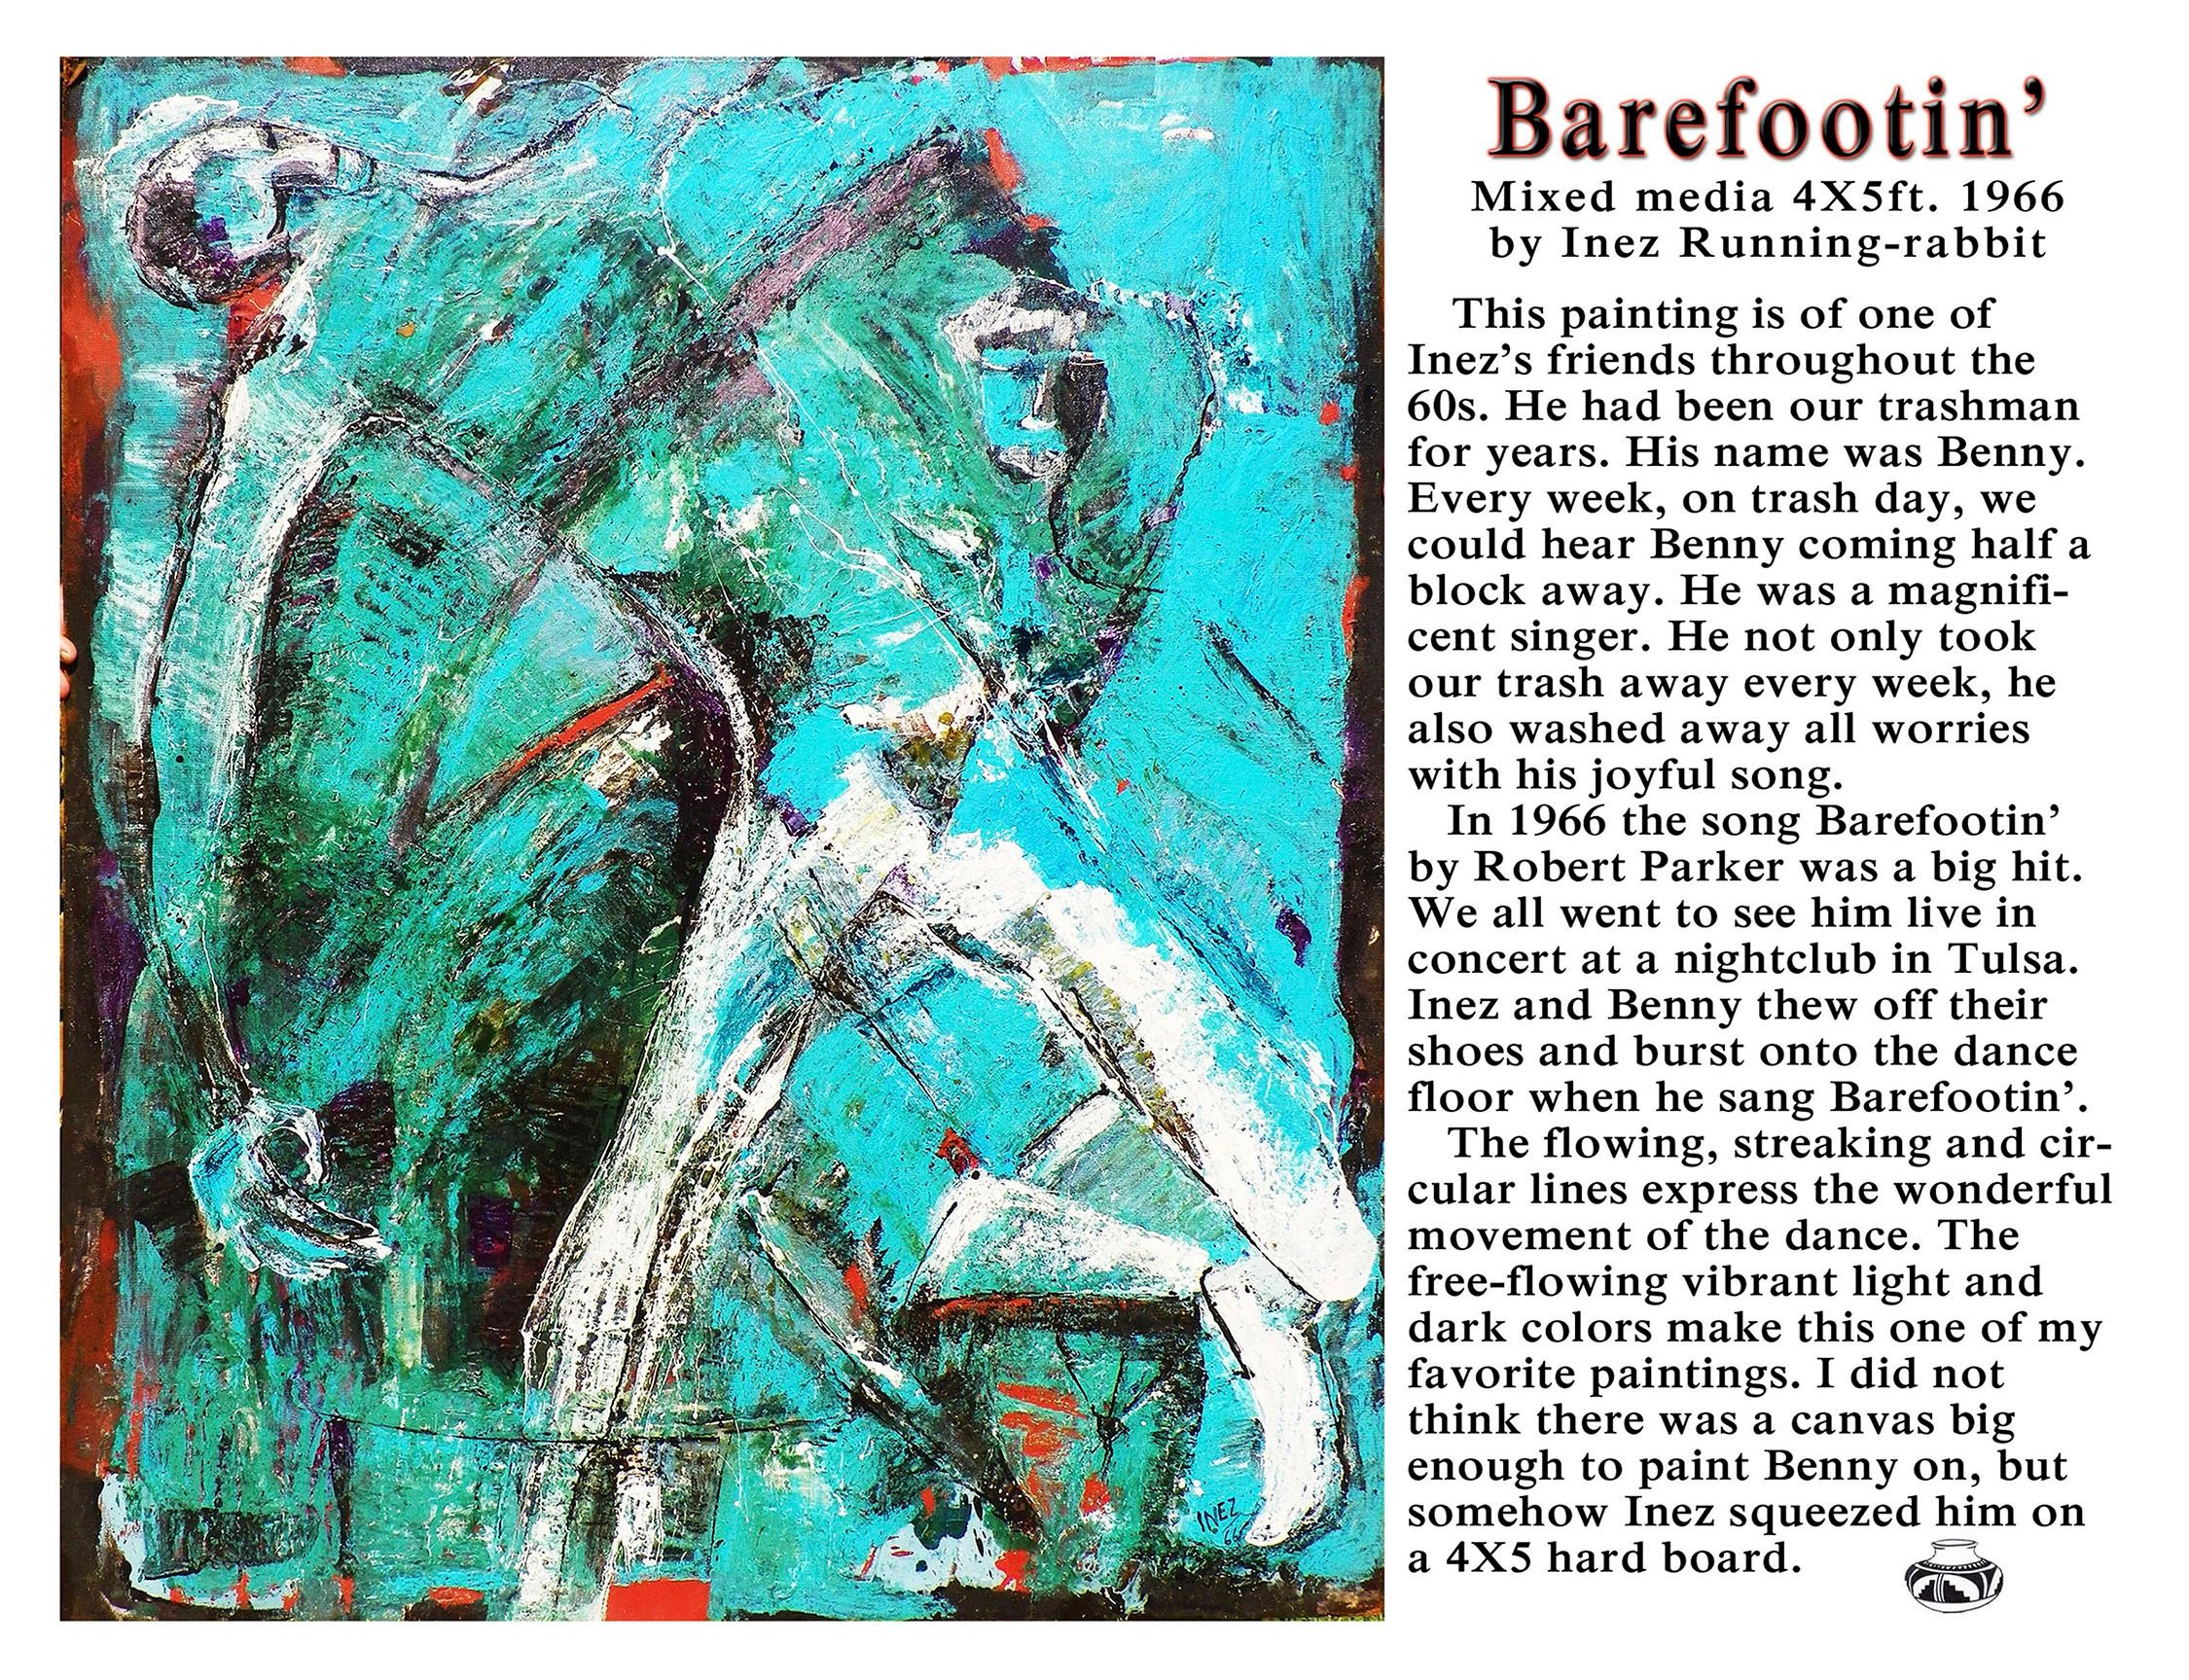 A story & painting of Benny Parker singing and dancing to "Barefootin'" by Inez Running-rabbit.